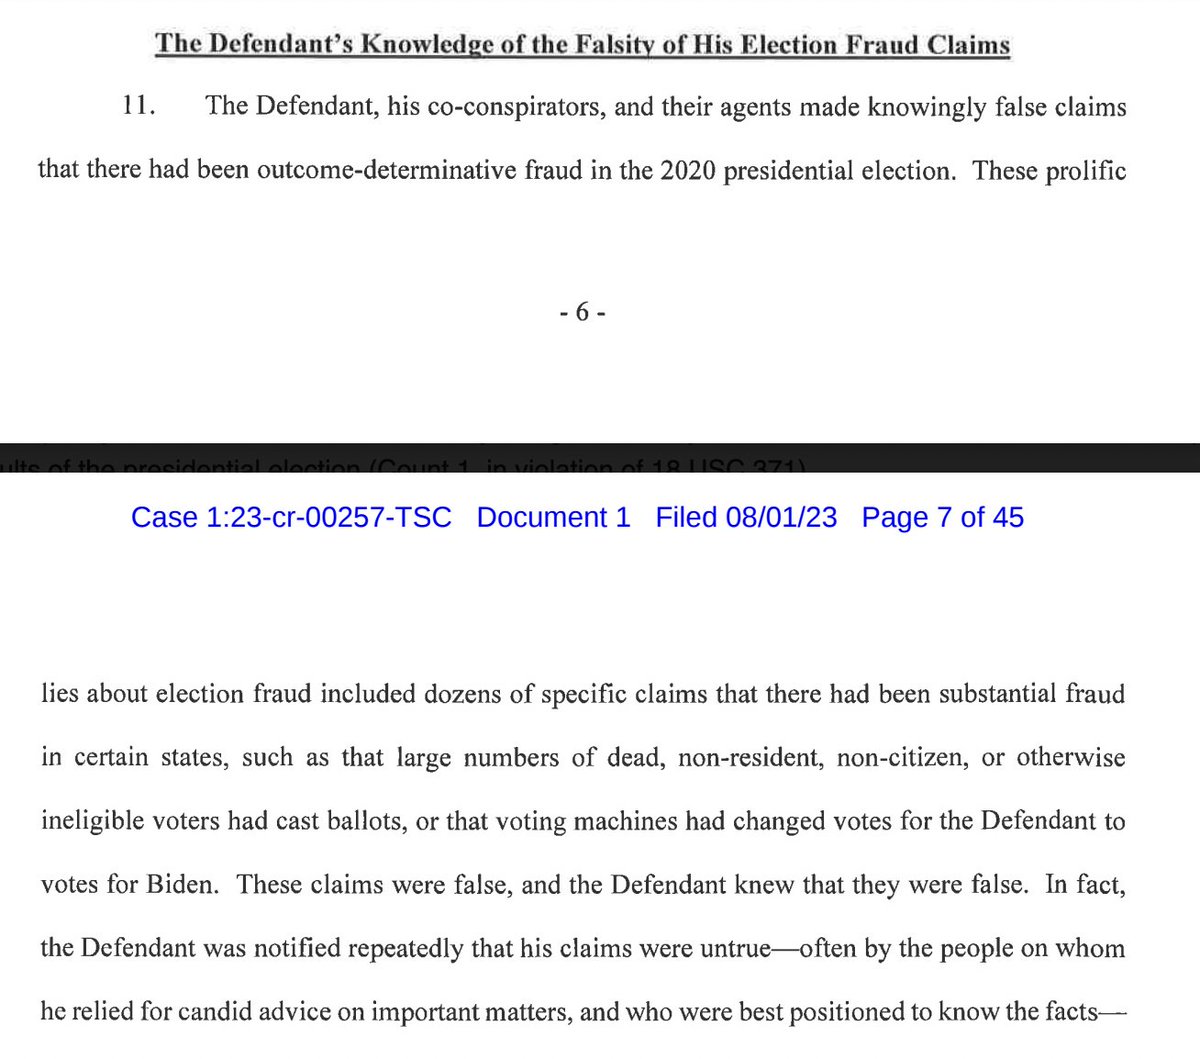 The indictment puts a lot of ink into specifying that Trump knew his statements about the election were outright lies. That's an important part of the case against Trump, because it speaks to his mindset.